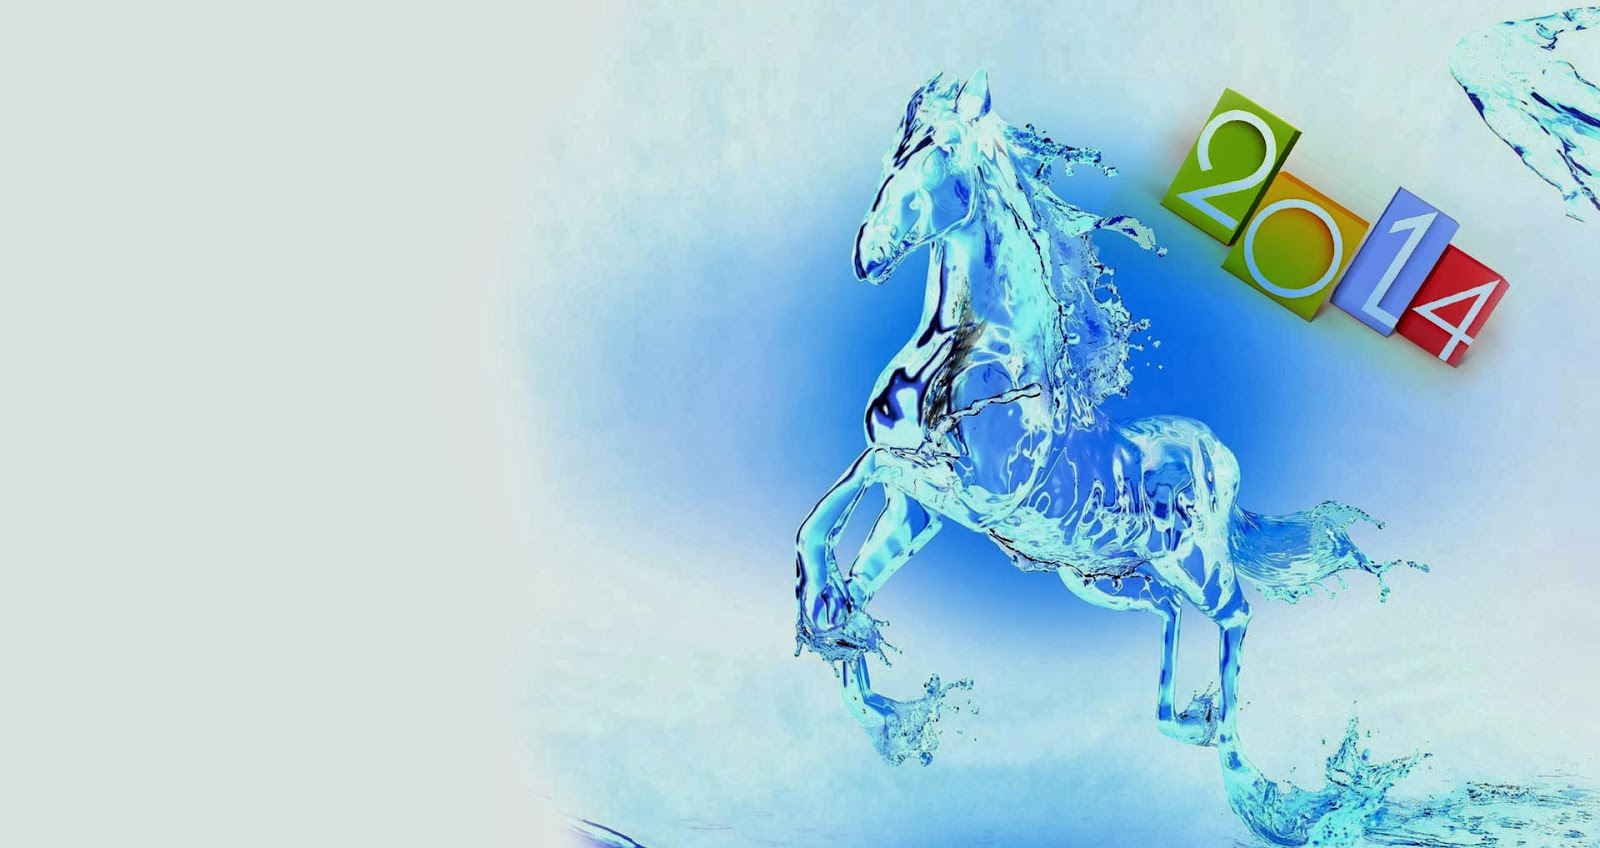 2014 Year Of Horse Chinese Zodiac Astrology Wallpaper Hd Free Download